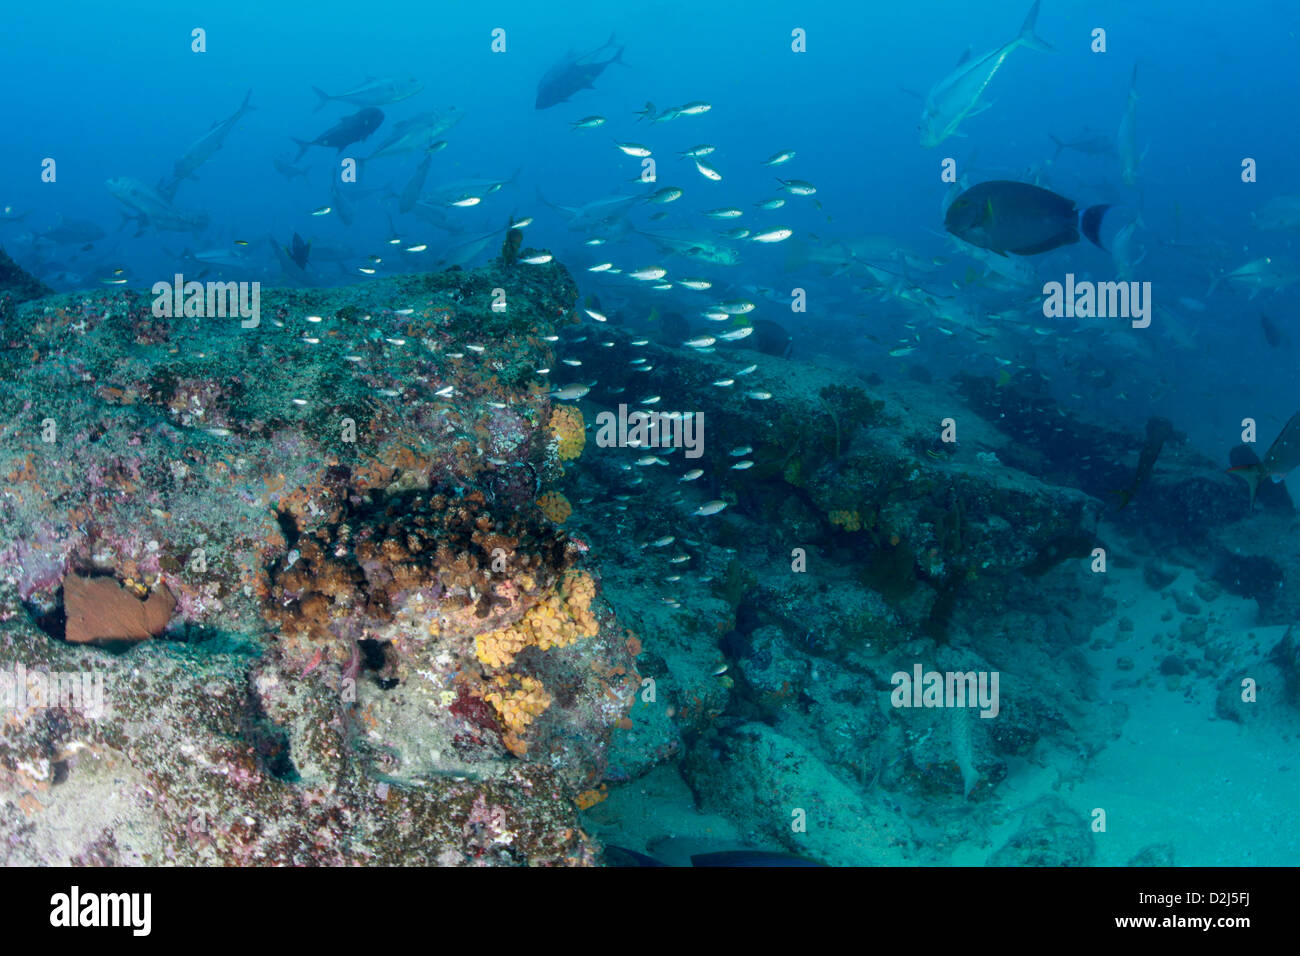 Schools of tropical reef fish at Cabo Pulmo National Marine Park, Mexico. Stock Photo